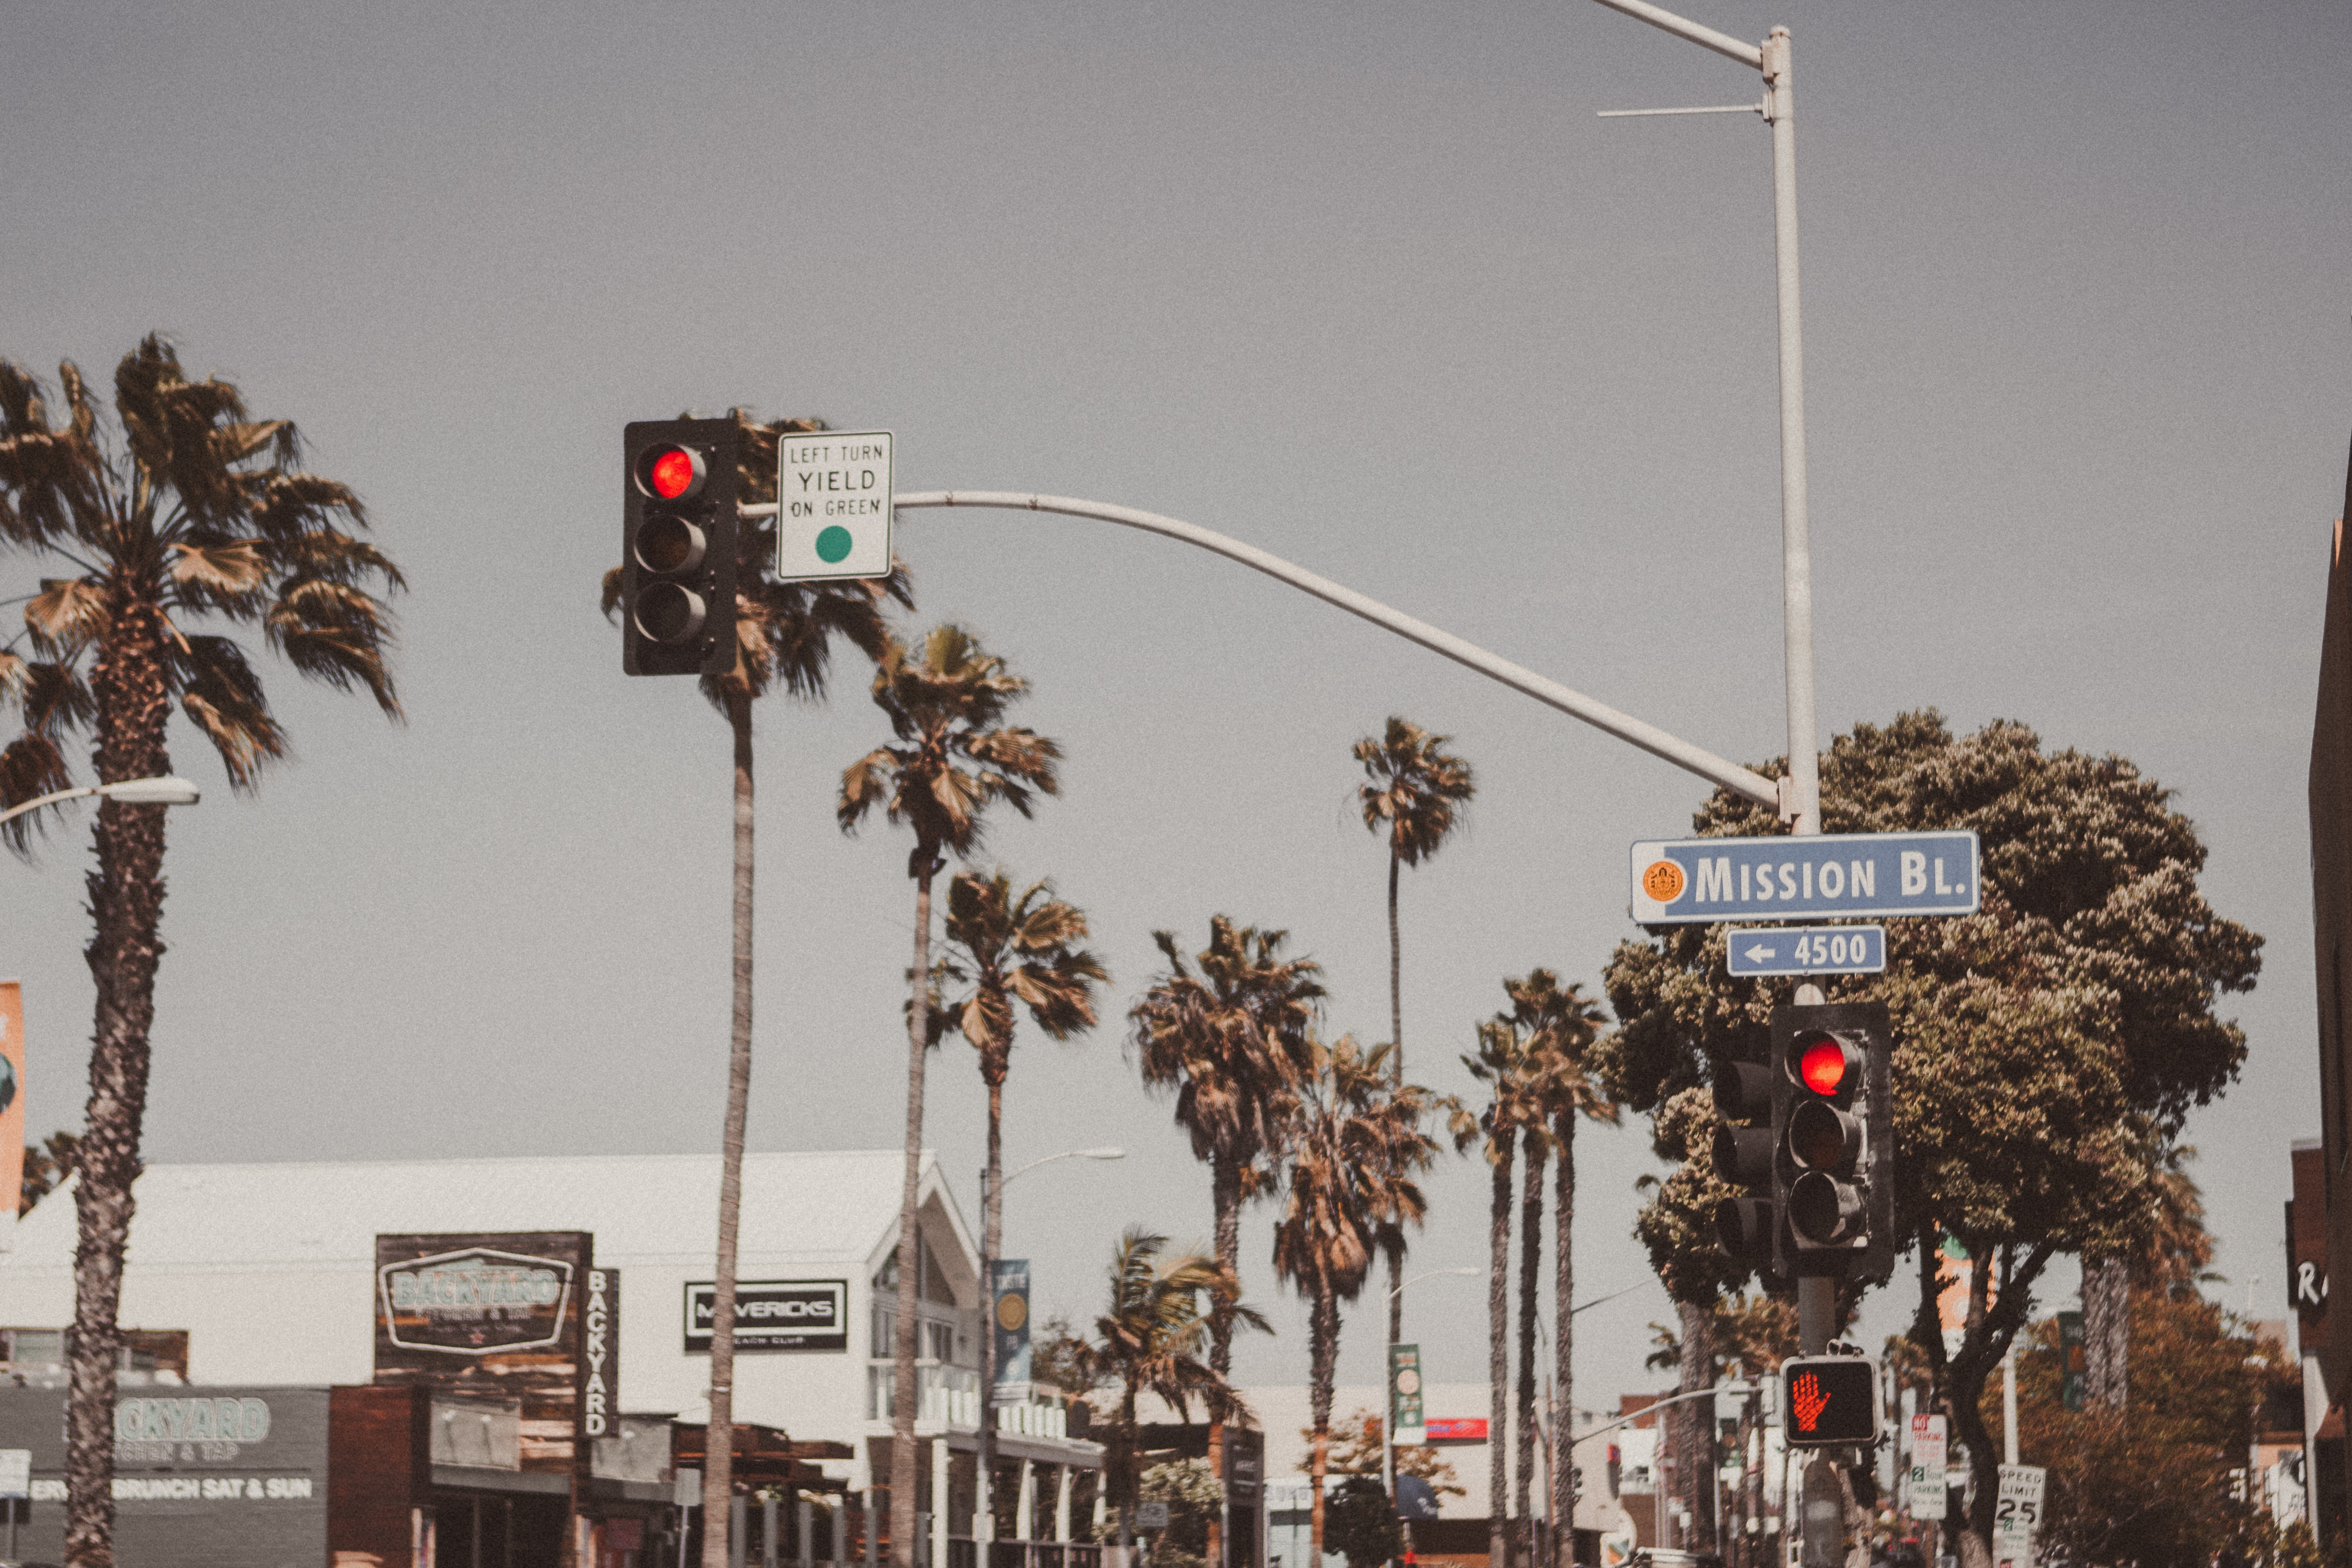 Palm trees, a traffic signal and a street light near Mission Boulevard in San Diego